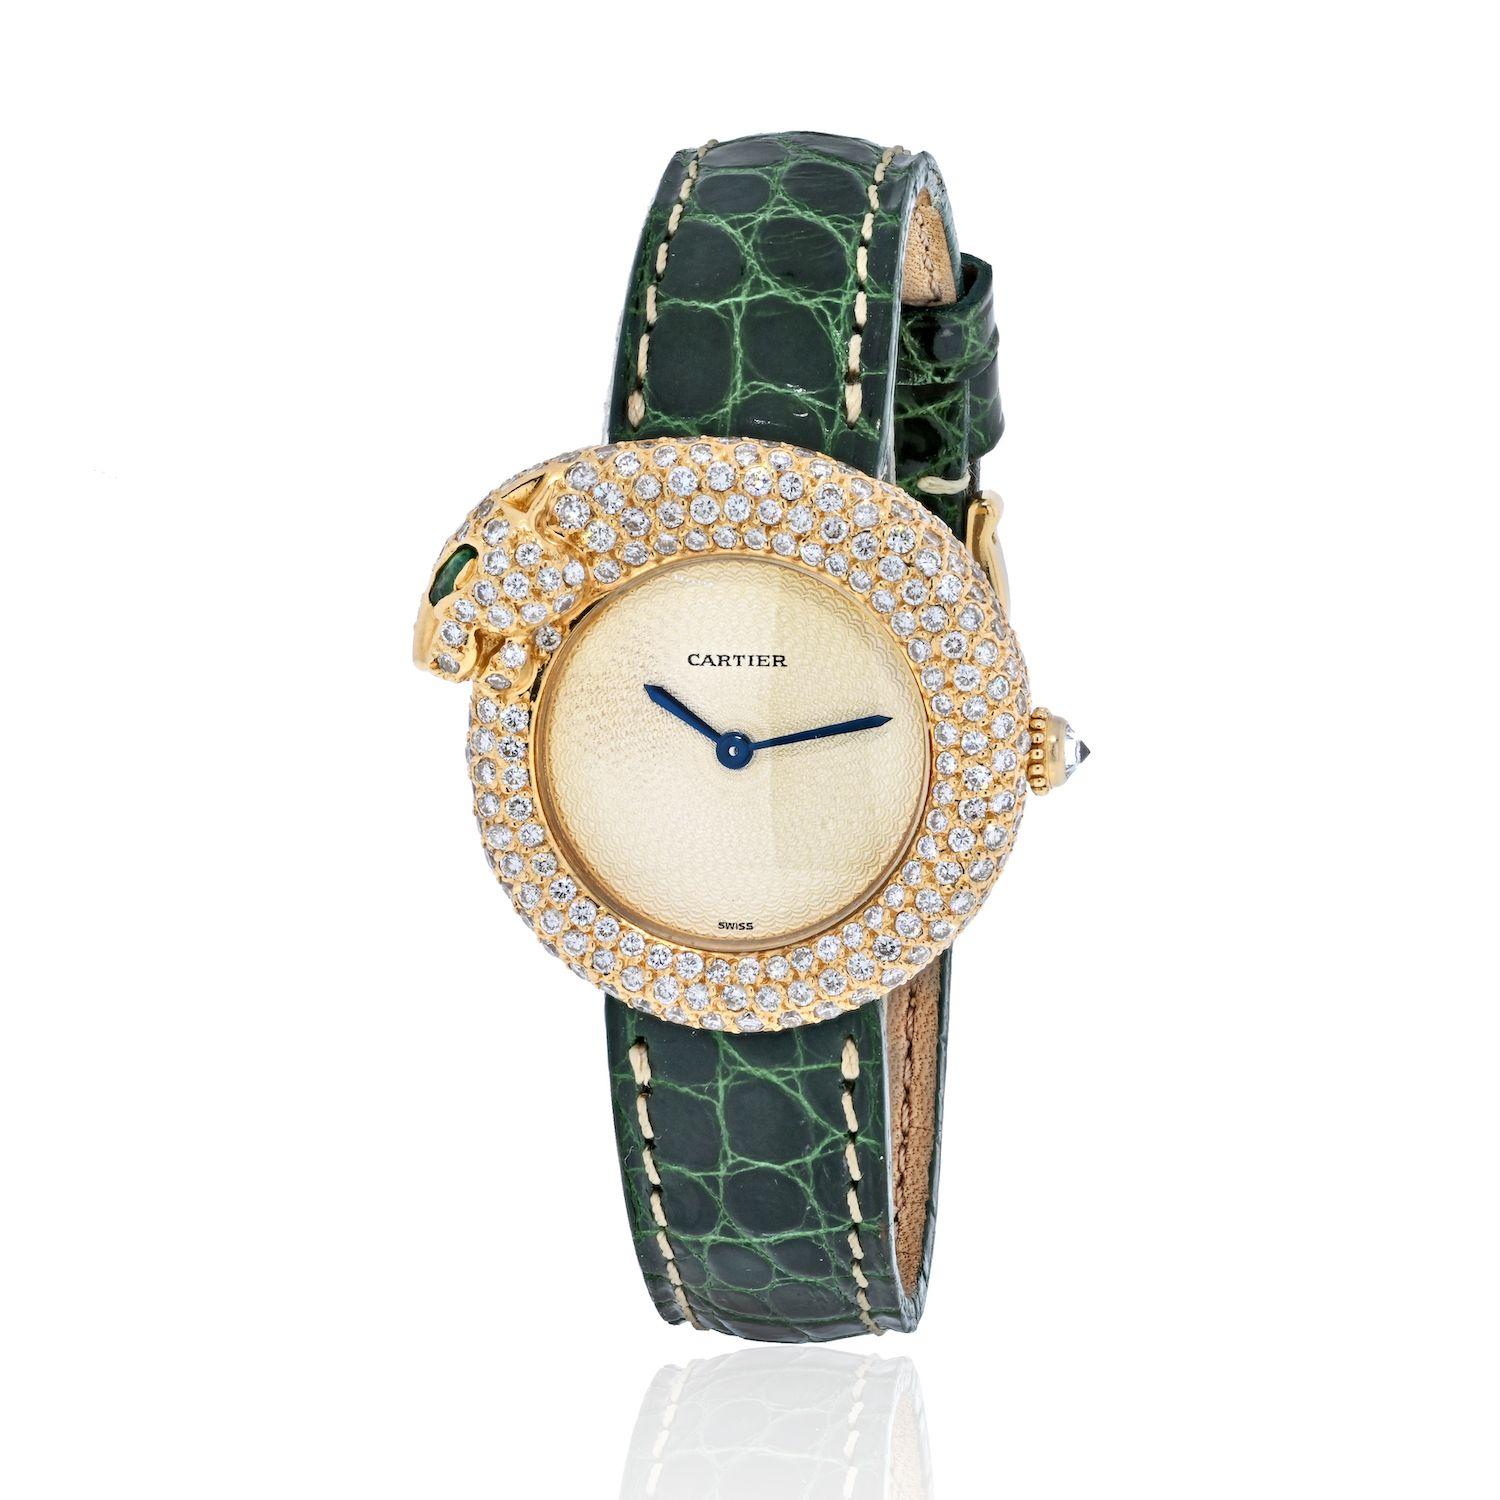 Lady's 18kt yellow gold and diamond Cartier Panthere wristwatch. Two-part case in 18kt yellow gold featuring a emerald-eyed panther forming a bezel, pave-set with approximately 3.00 carats total weight of round brilliant cut diamonds. Off-white